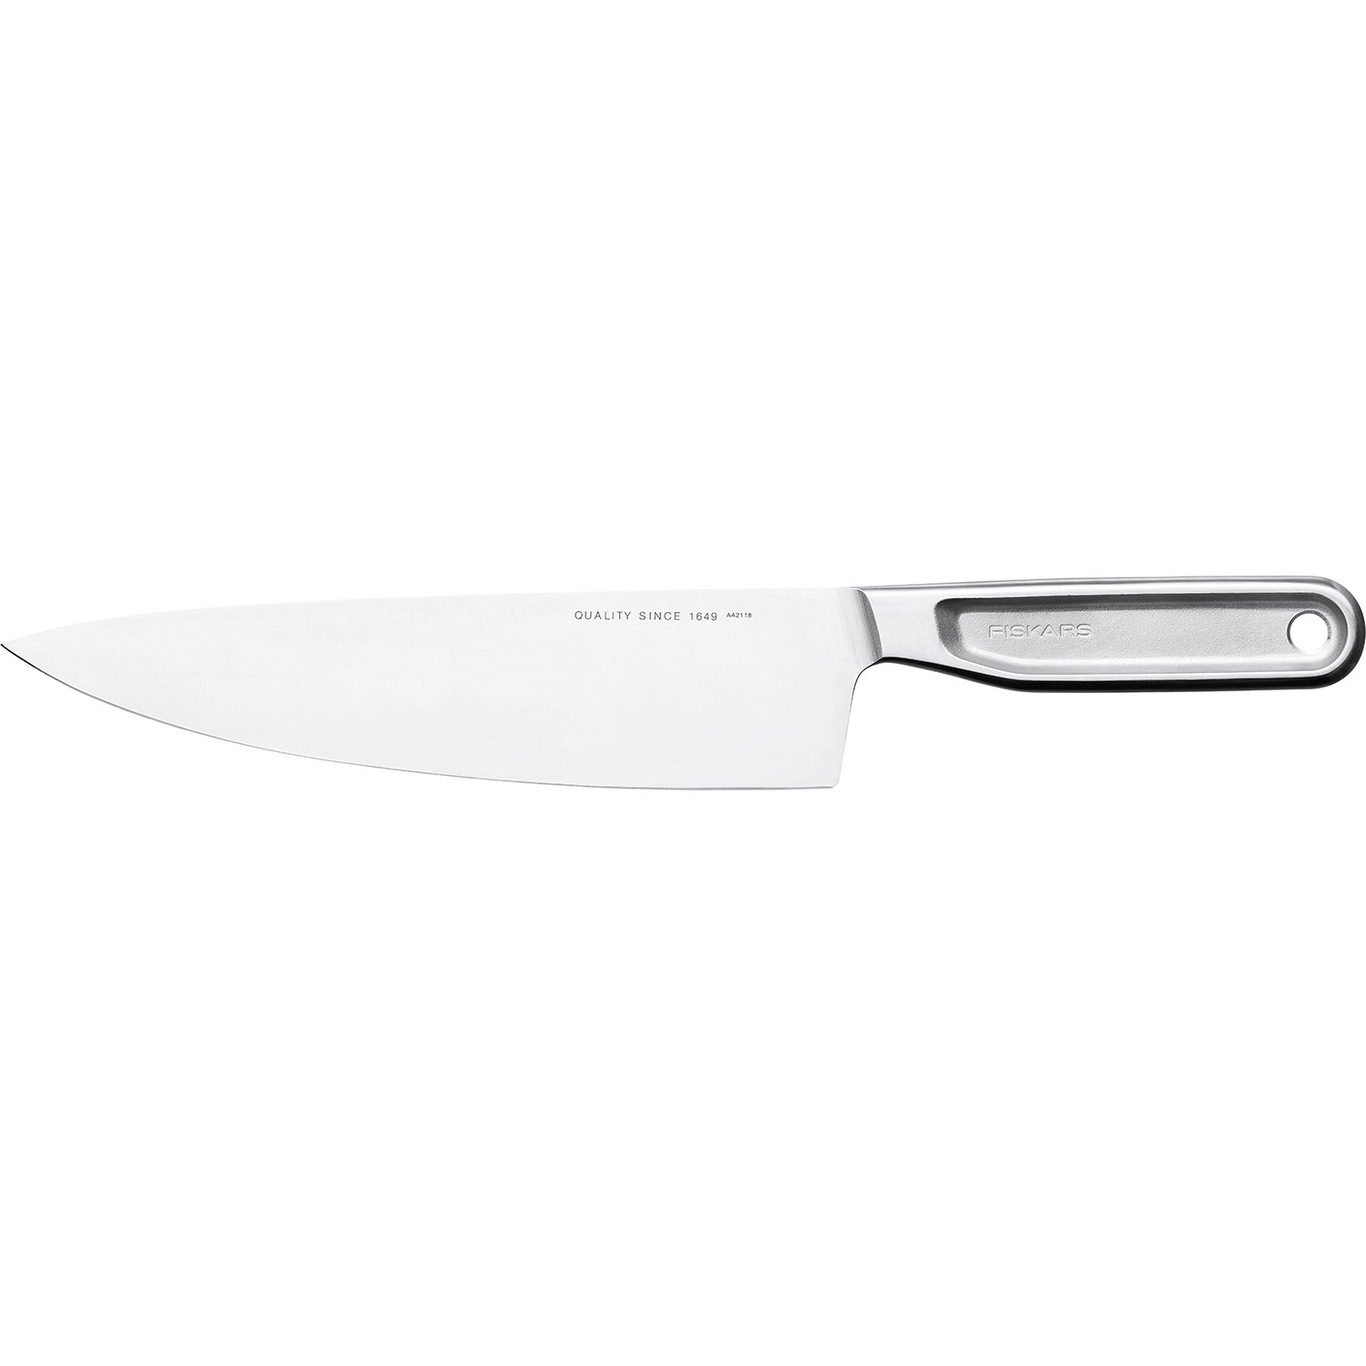 All Steel Chef Knife, 20 cm